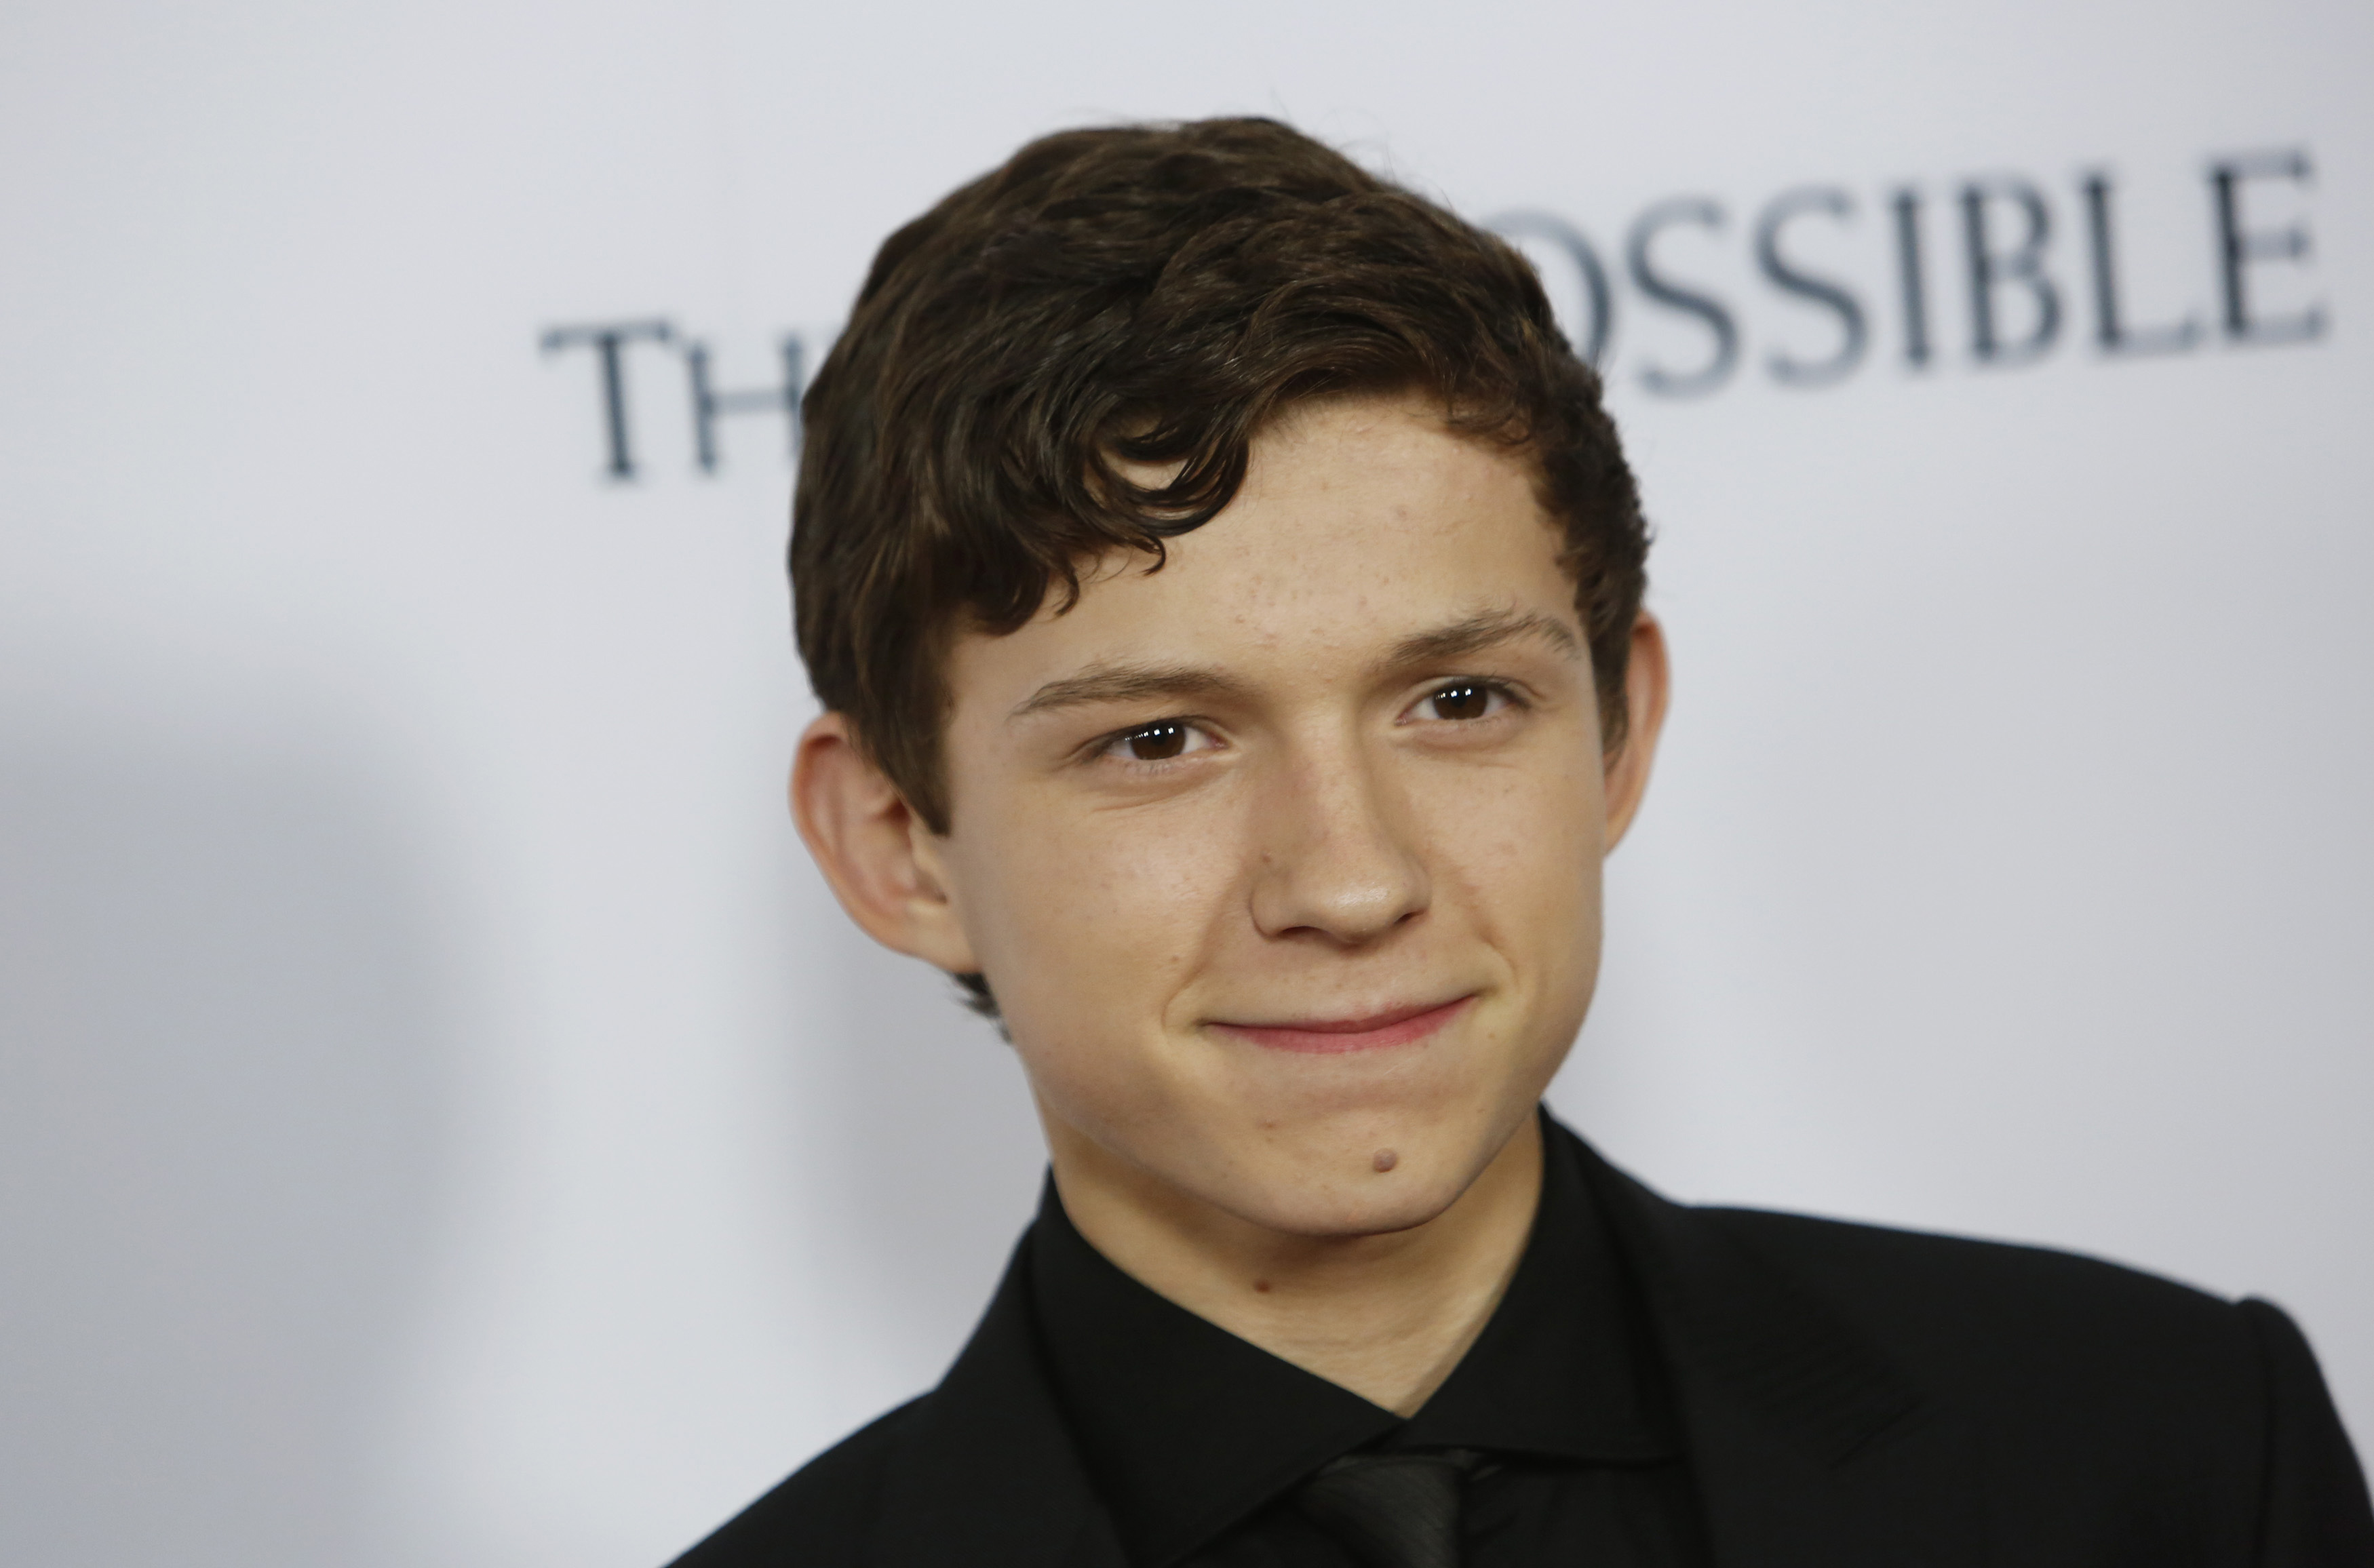 Actor Tom Holland Arrives At The Premiere Of The Movie "The Impossible" At Arclight Cinema In Hollywood